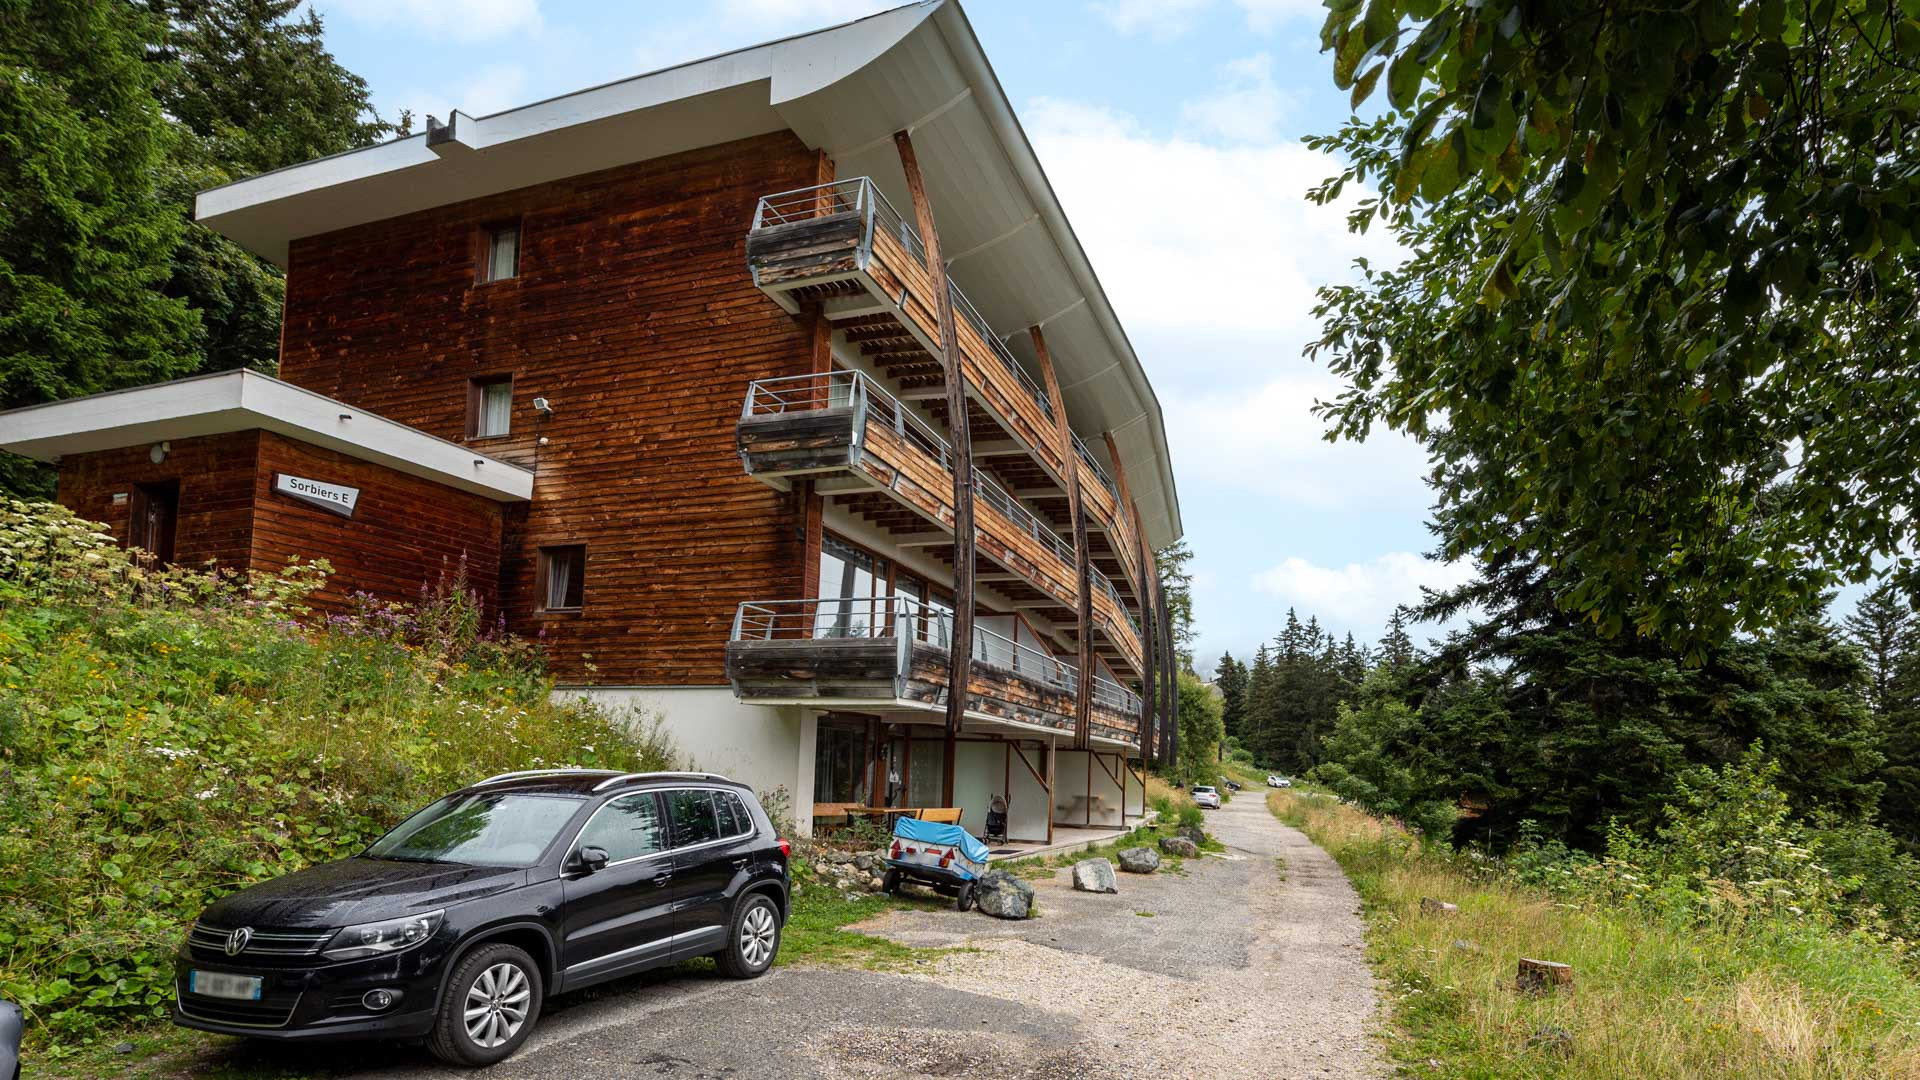 Appartement V du Bachat Sorbiers E33 - Appt 4/6 pers - Chamrousse